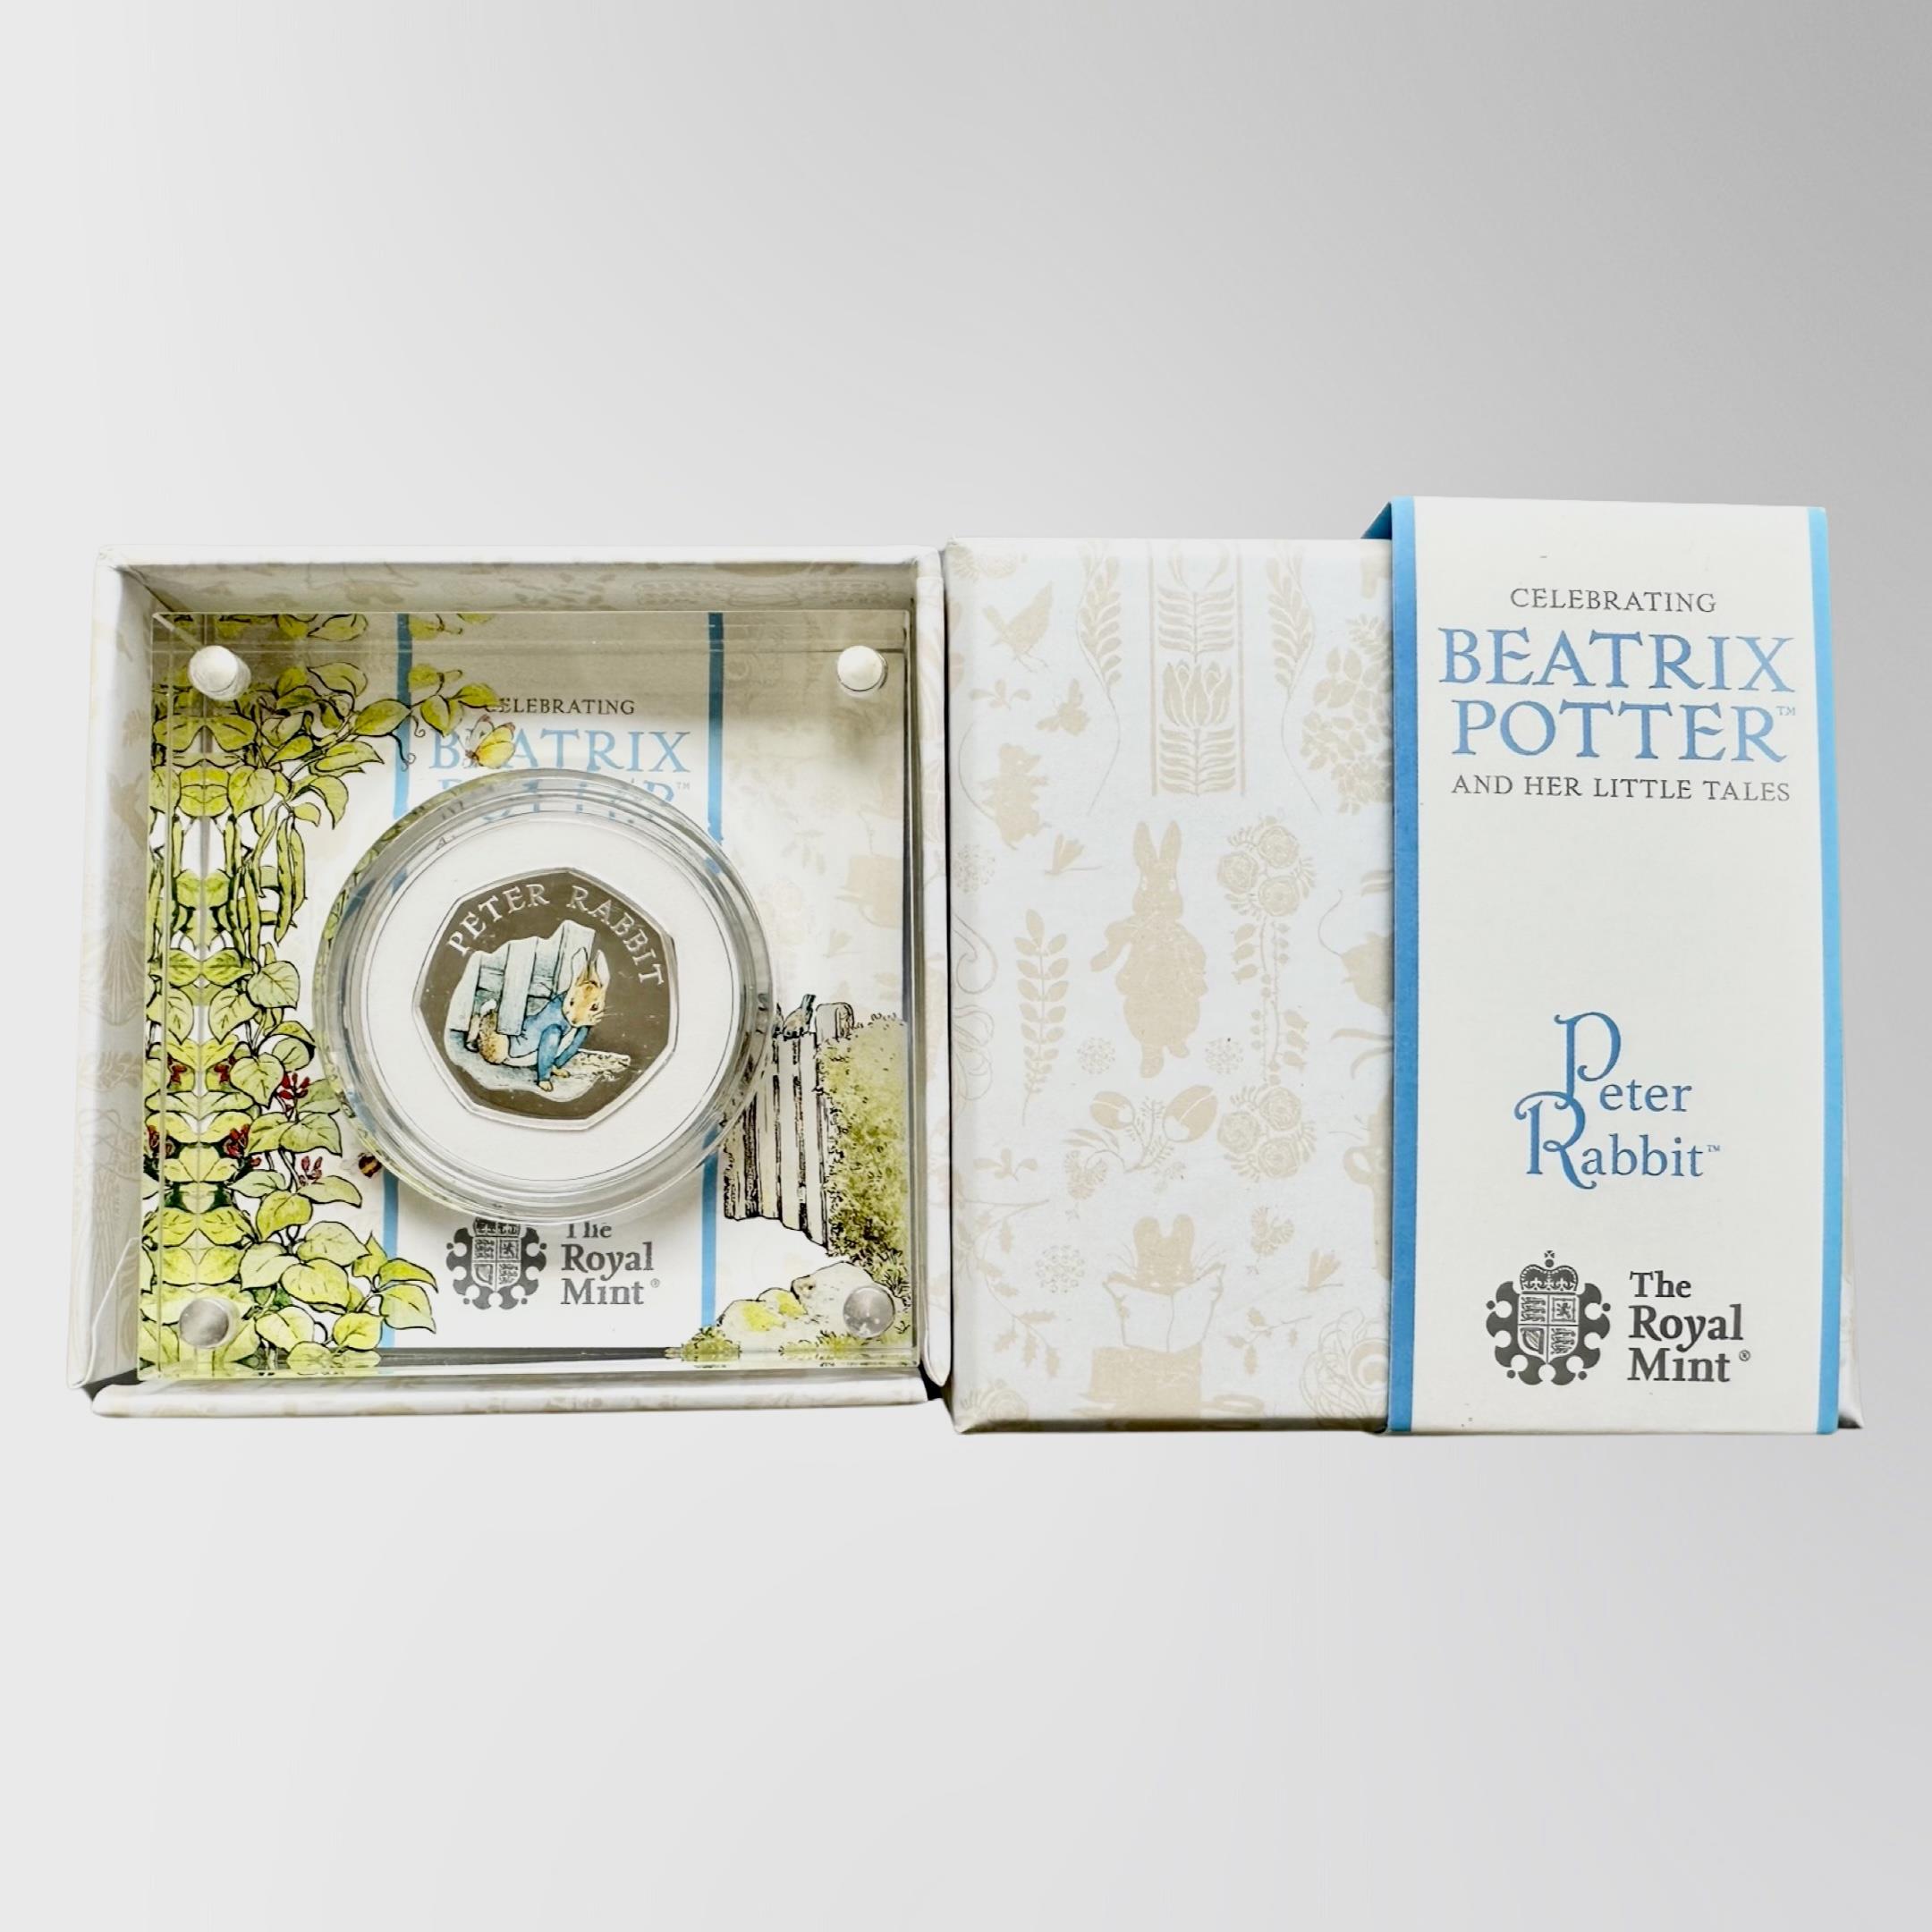 The Royal Mint : Beatrix Potter - Peter Rabbit, 2020 UK 50p Silver Proof Coin, with papers, boxed.